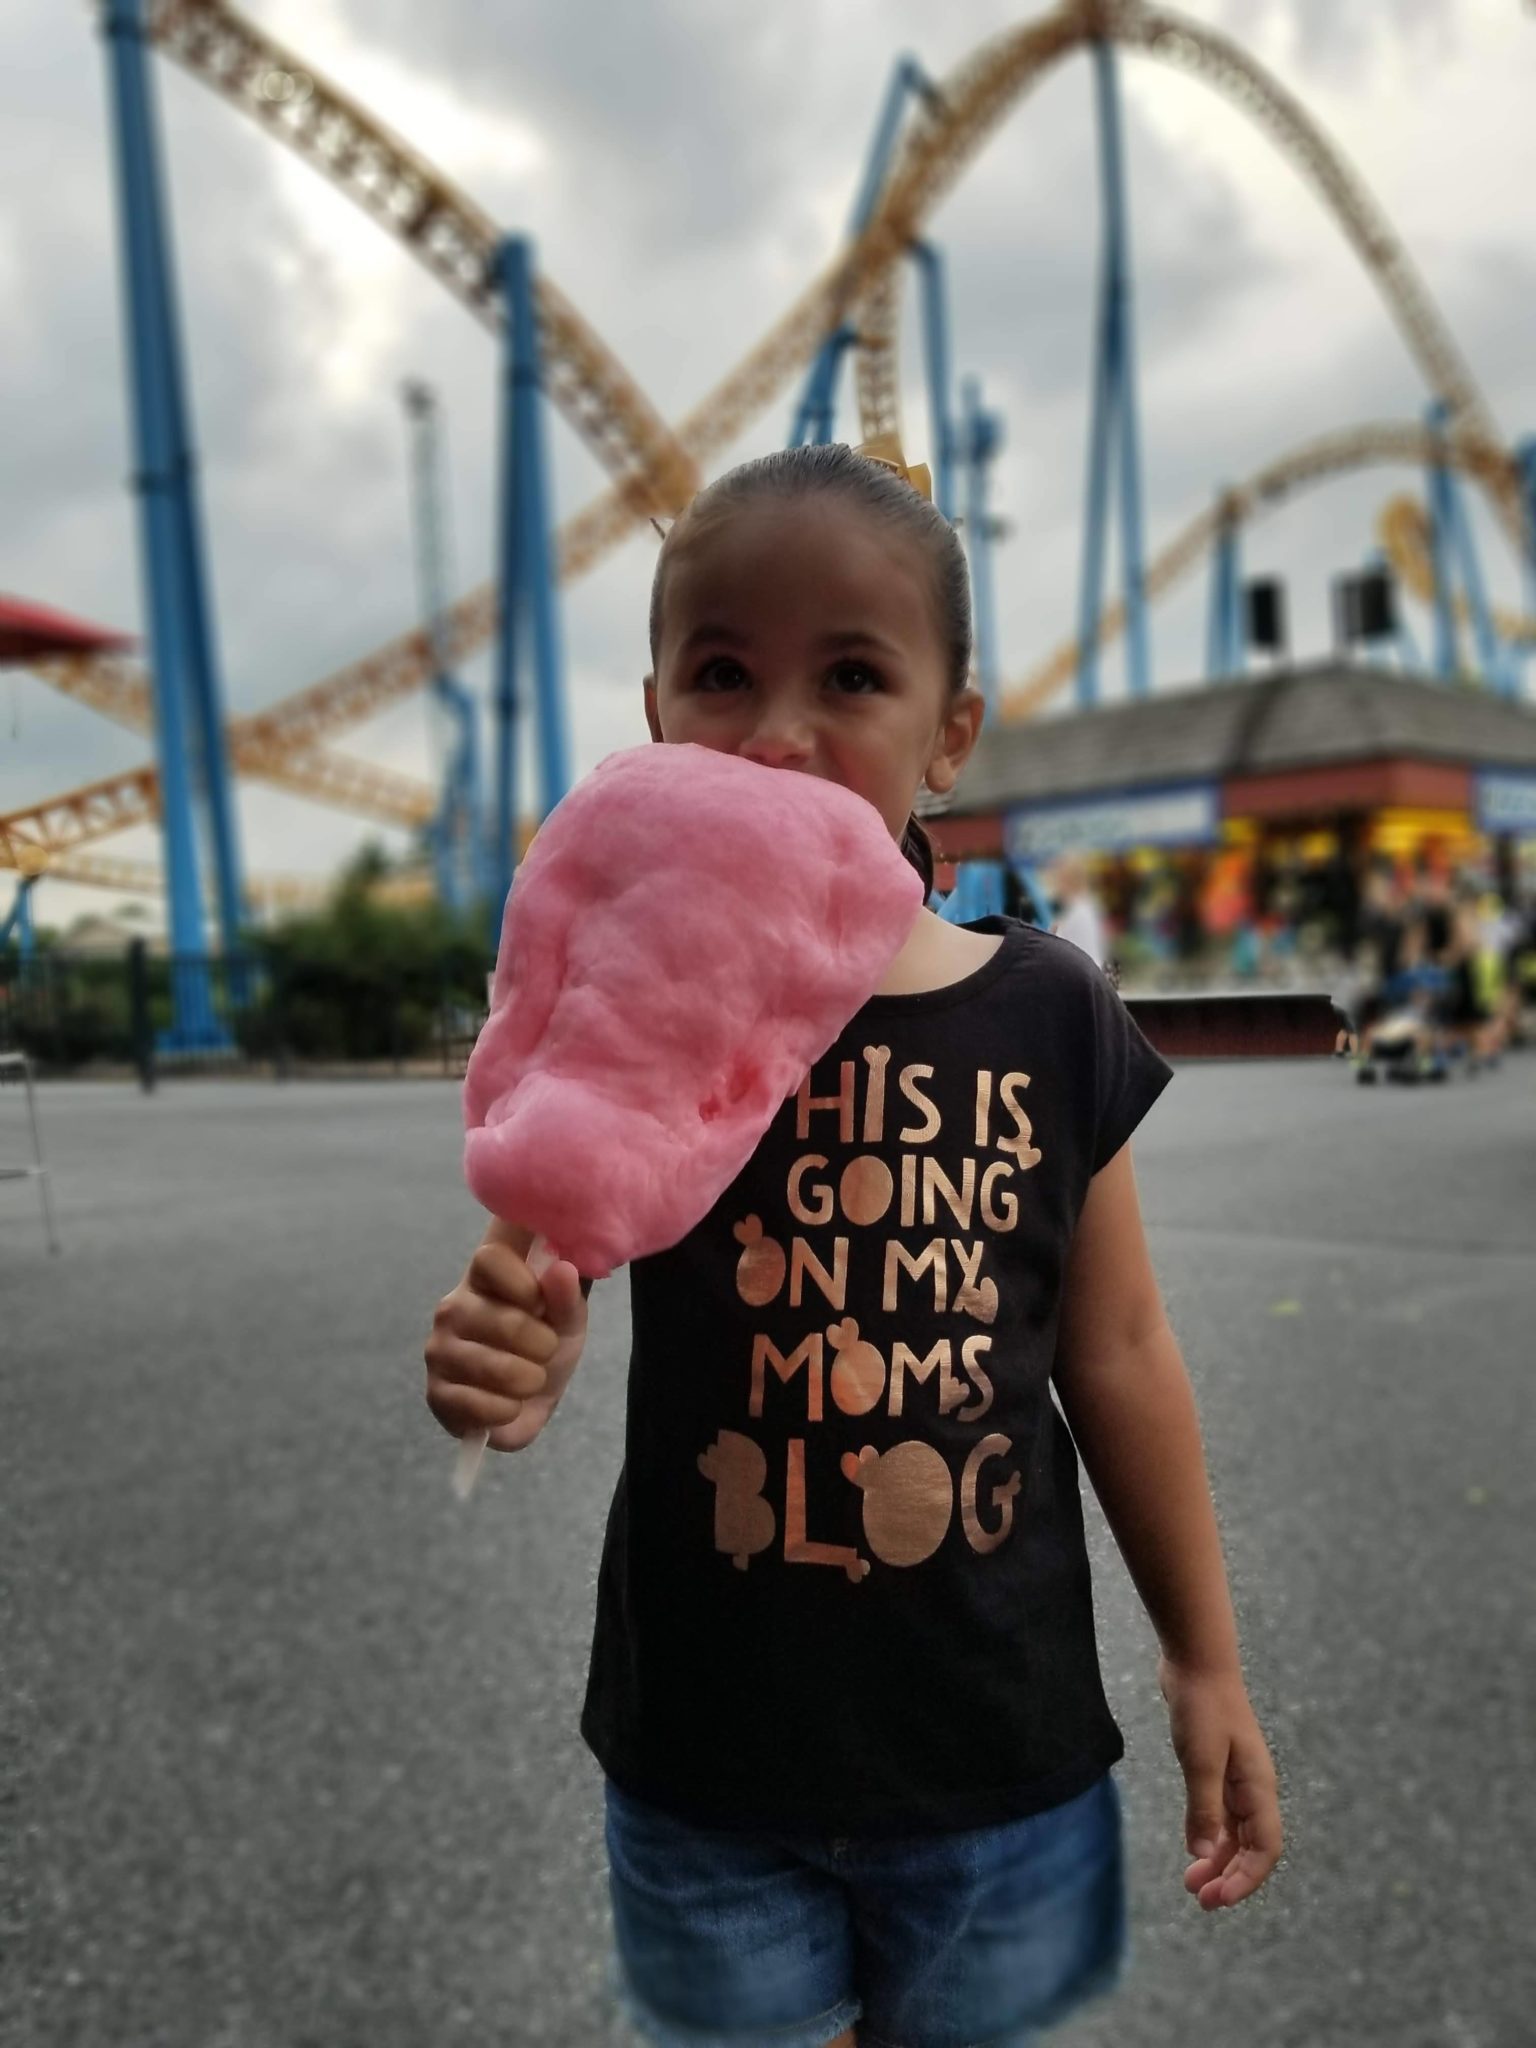 Cotton Candy at Hershey Park